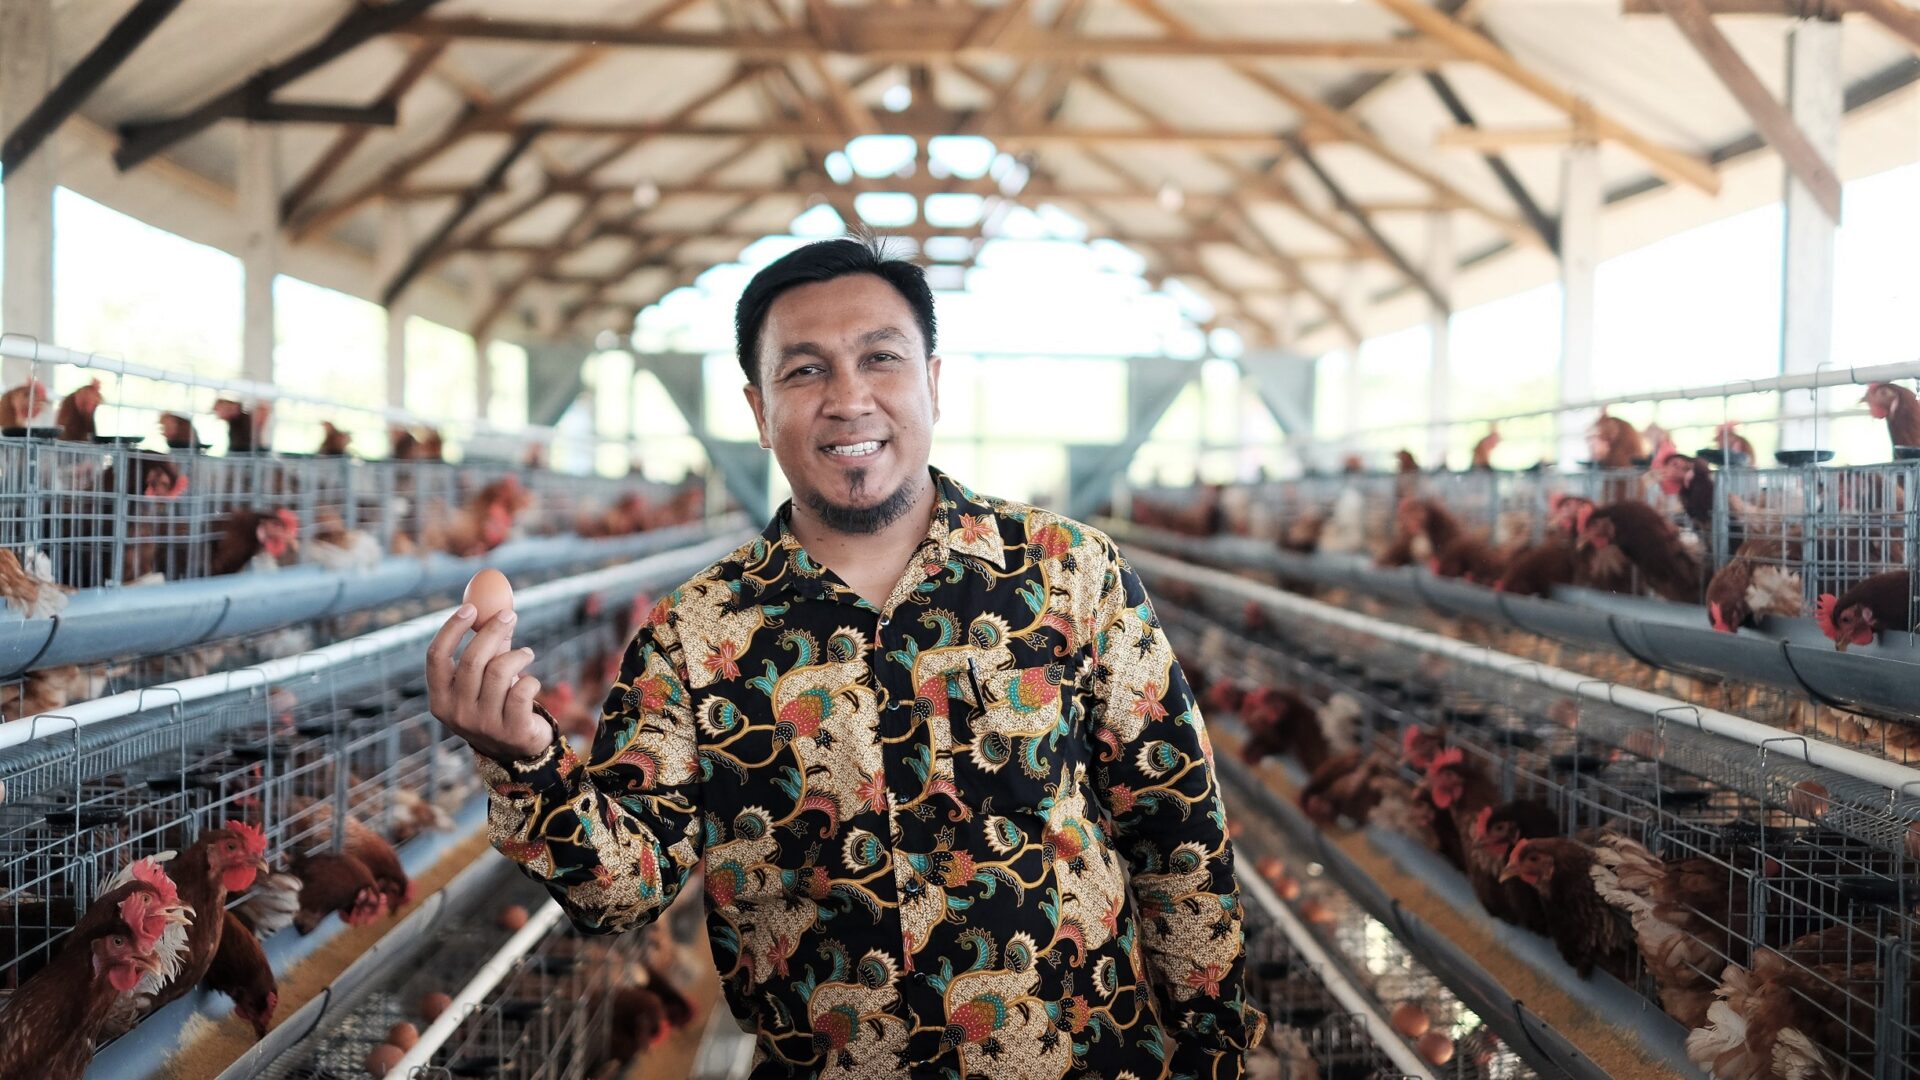 The pilot climate smart chicken shed carries a number of innovations and benefits for local farmers. Photo: Nyoman Prayoga/USAID APIK